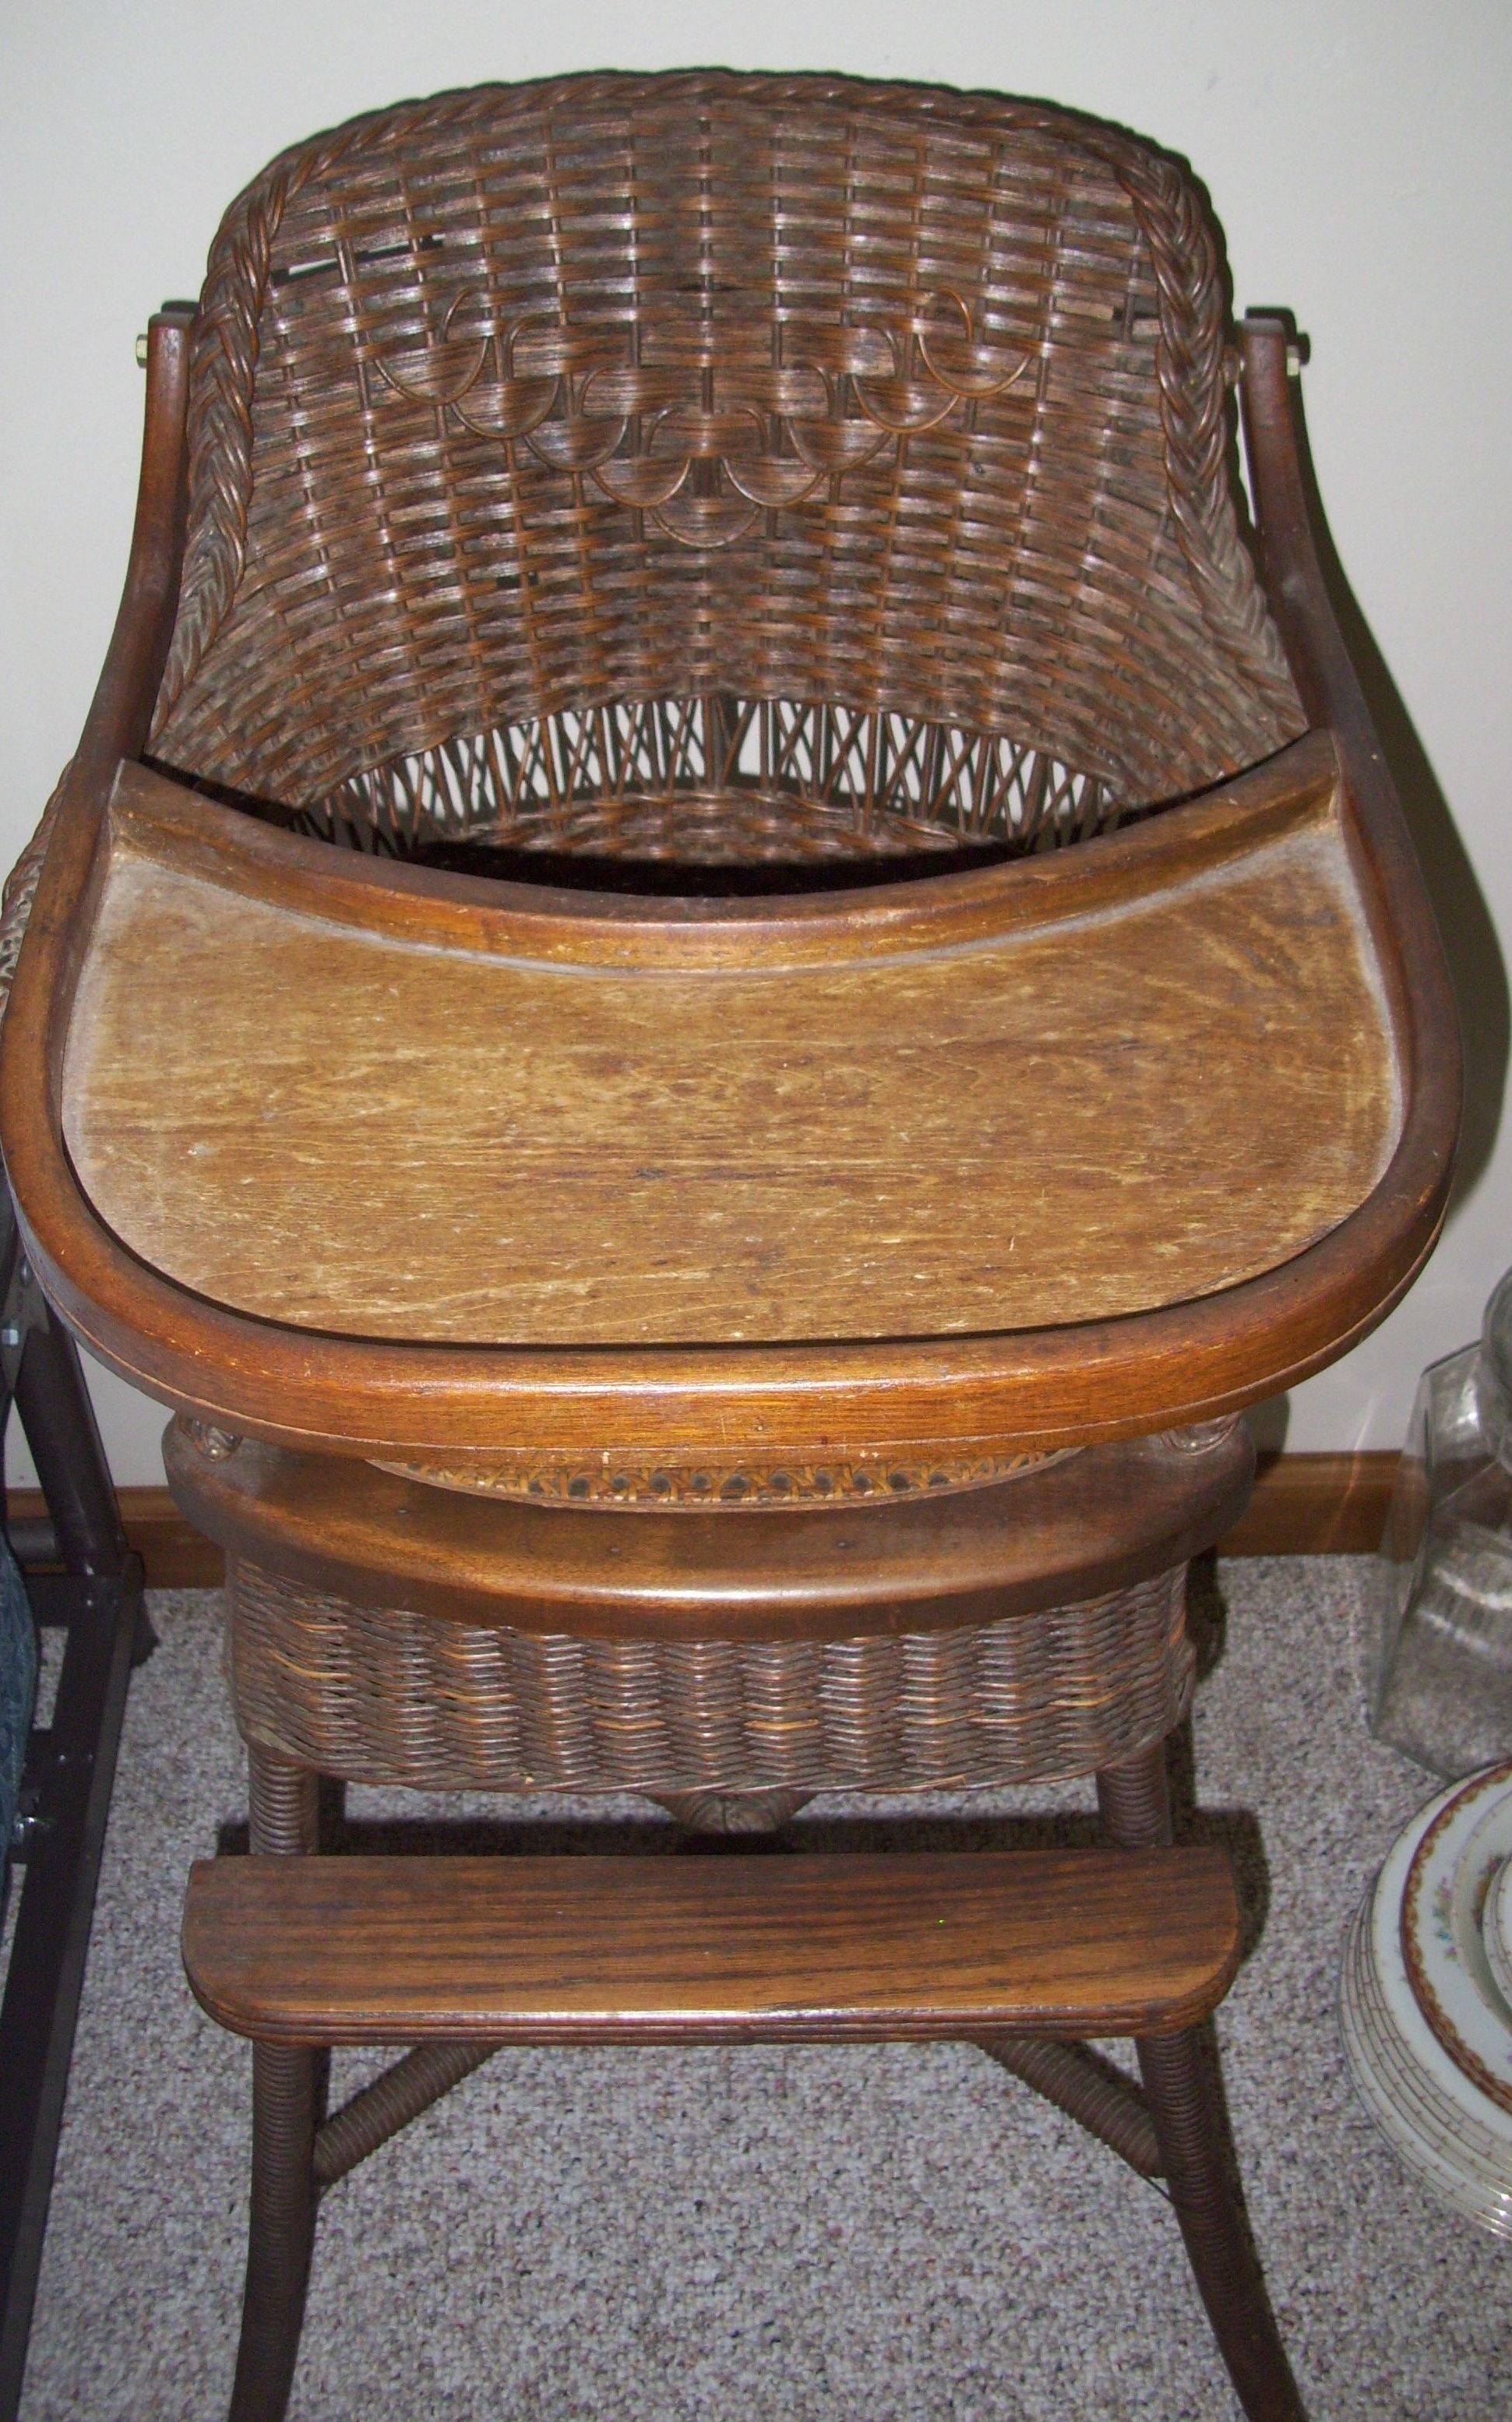 Popular Antique Wicker High Chair (View 7 of 15)